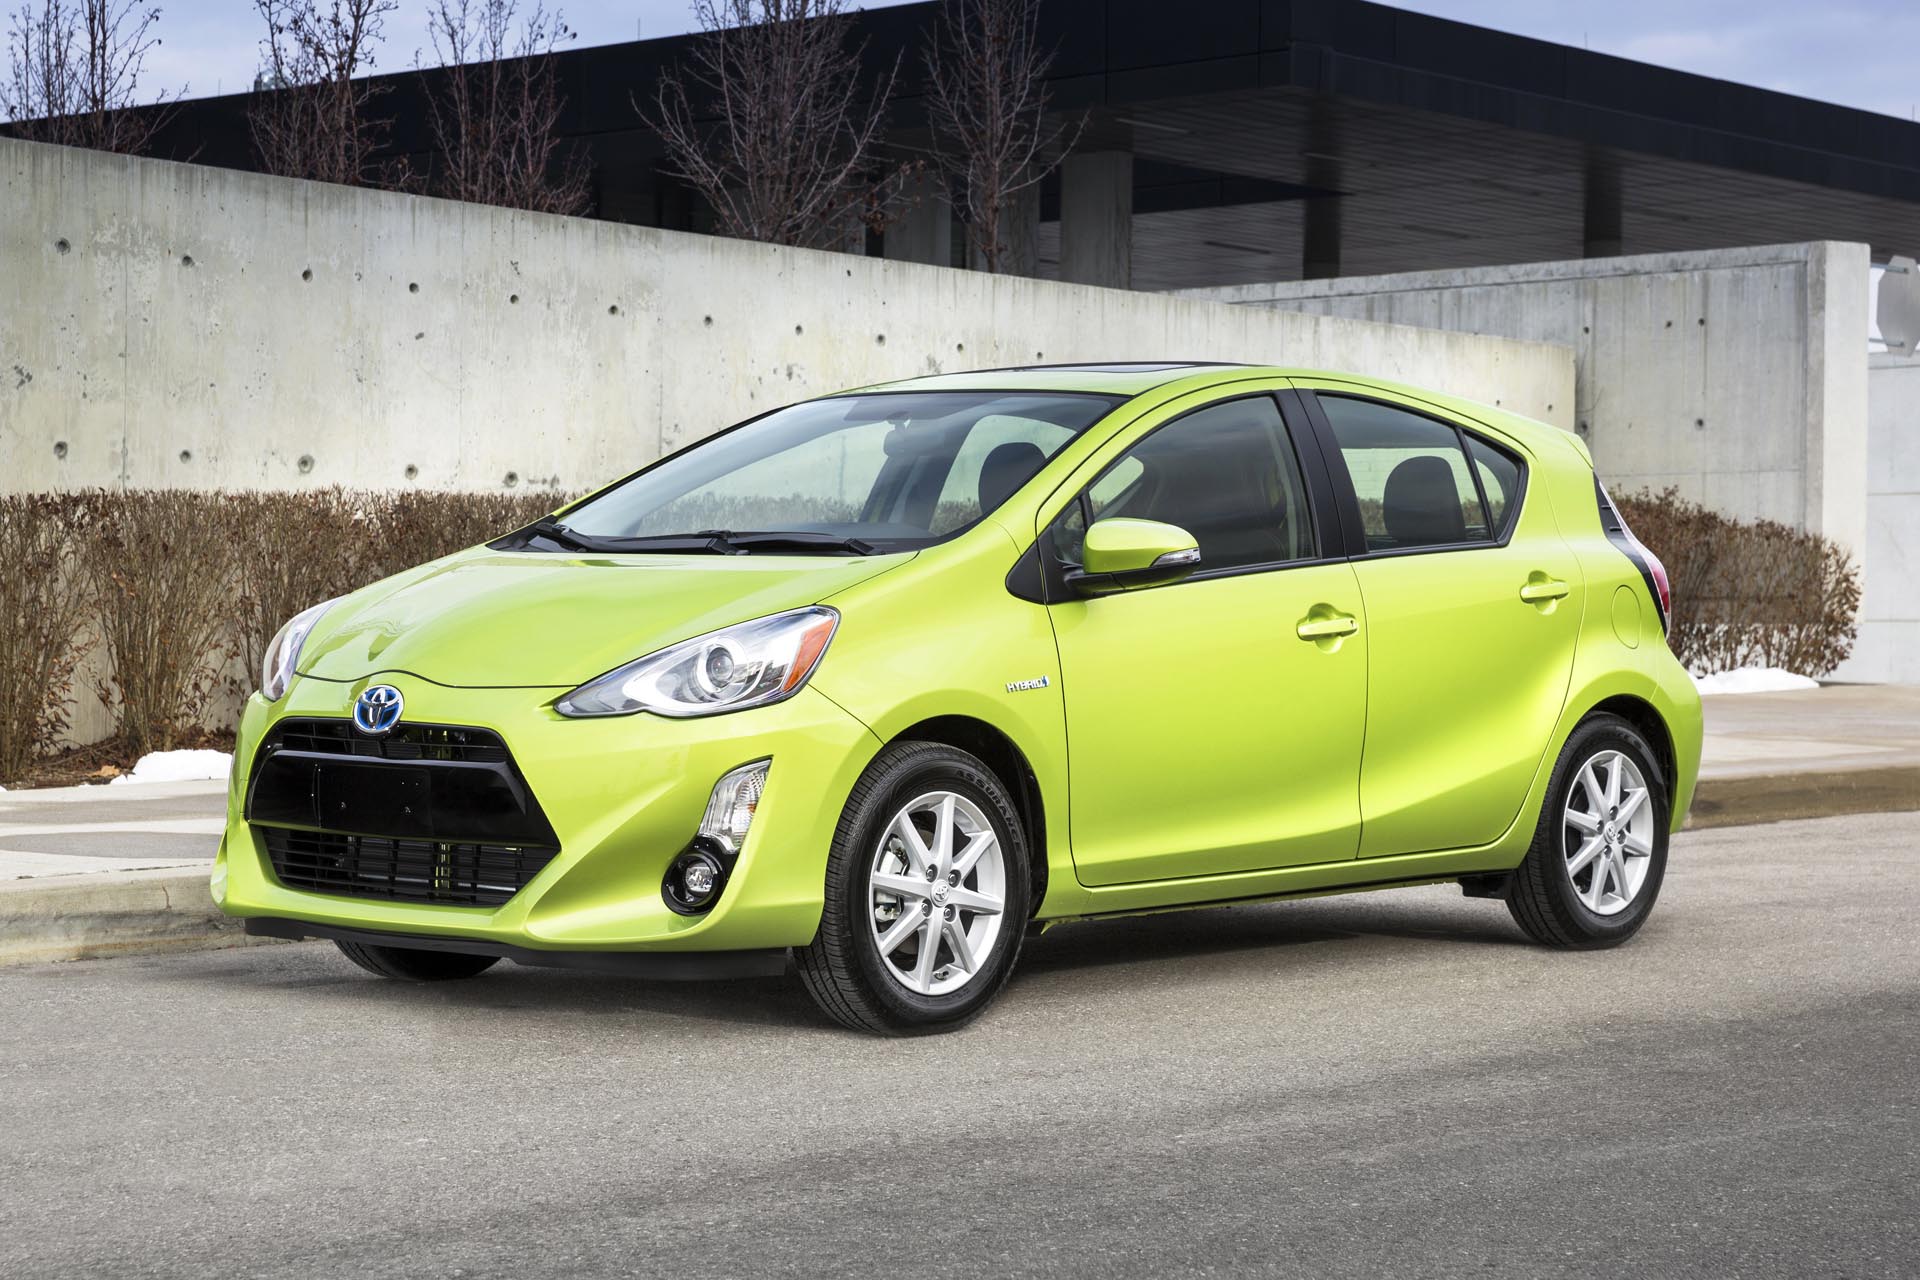 At $21,055, the base Prius C is twice the price of the base Nissan Micra, but it comes with Bluetooth telephone connectivity and automatic transmission as standard equipment, and it's even more miserly with fuel (4.1 / 5.1 L/100 km city/highway). Better yet, thanks to its hybrid drivetrain it'll use essentially no gas and produce no emissions when traffic slows to a near standstill, instead running on electric power when possible. So you can rest both your pocketbook and your conscience. Move up to the Prius C Technology and you get heated seats, pushbutton start and a nicely-featured infotainment system with satellite radio. It makes for a formidable little commuting weapon.